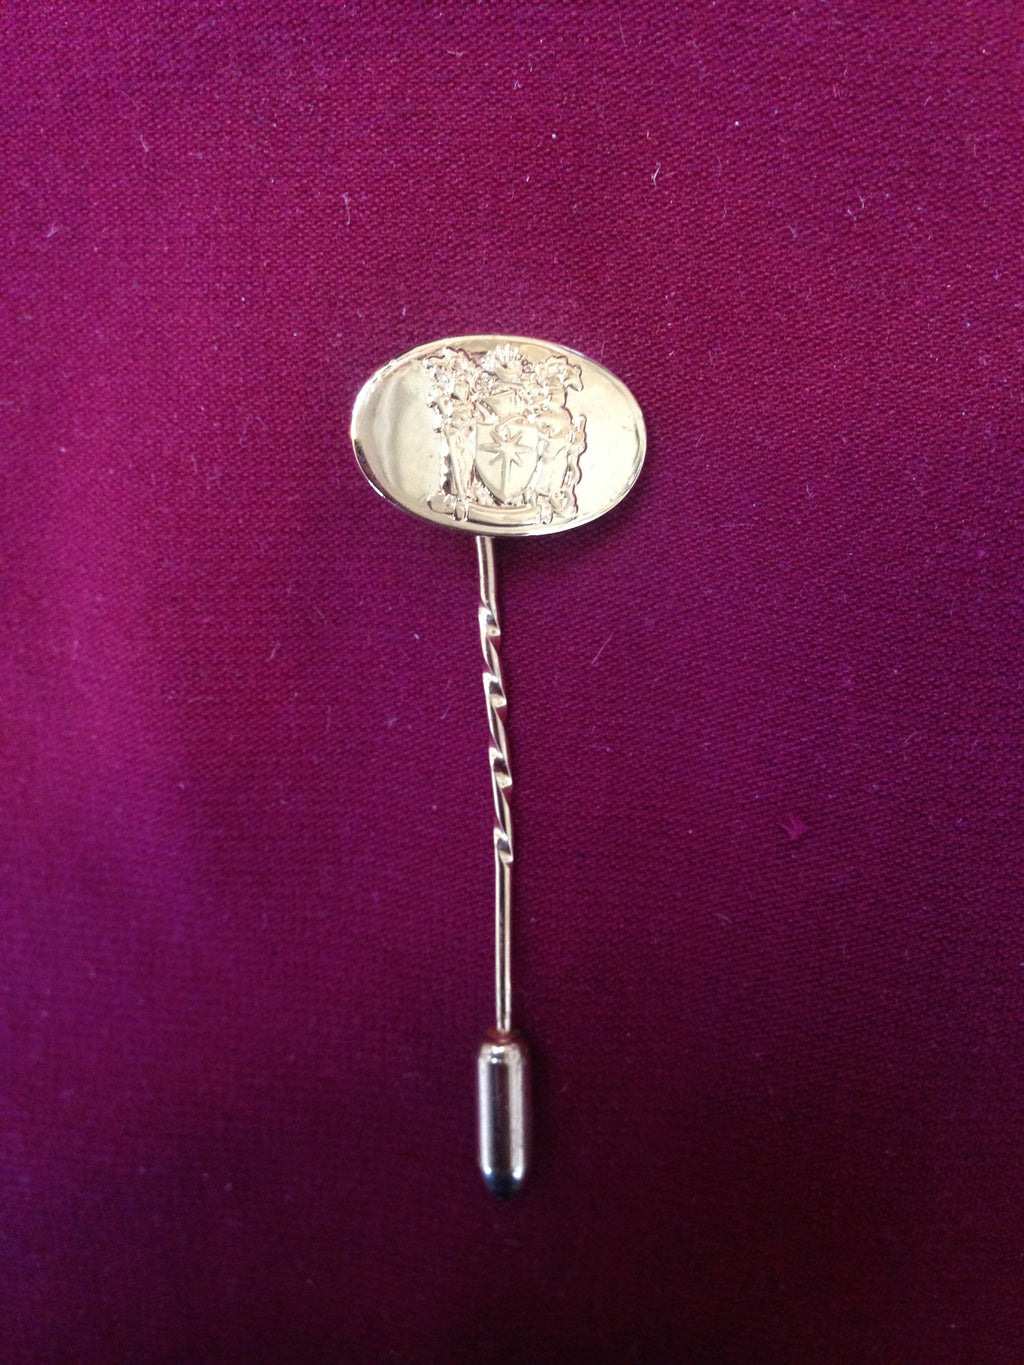 Royal College of Obstetricians and Gynaecologists Lapel Pin